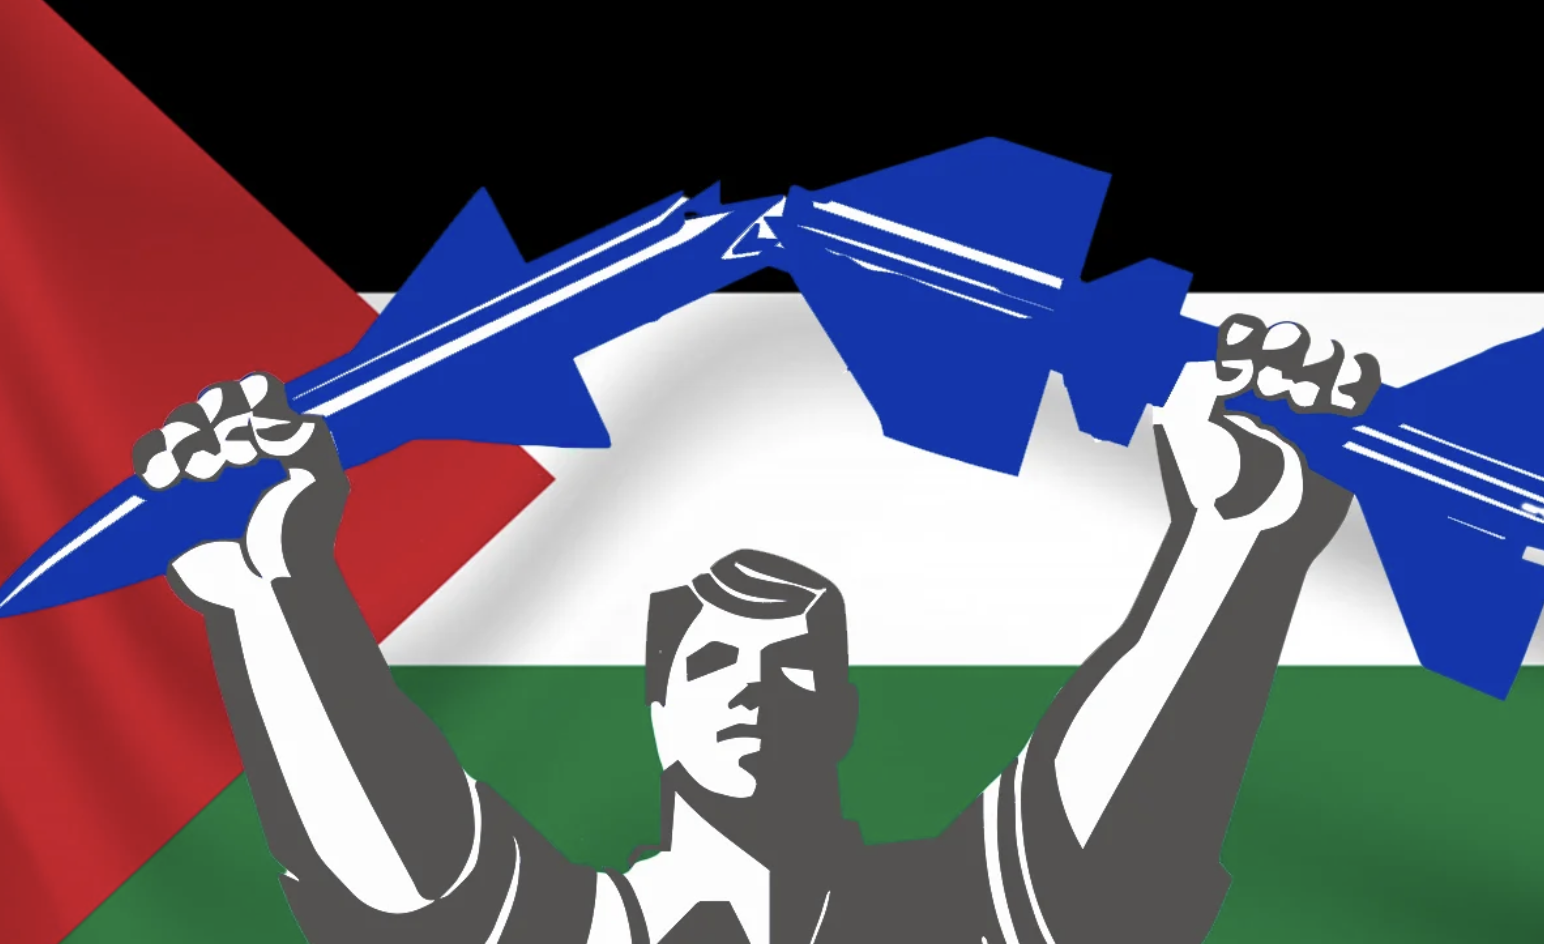 Down with hypocrisy! Defend Gaza! – IMT statement